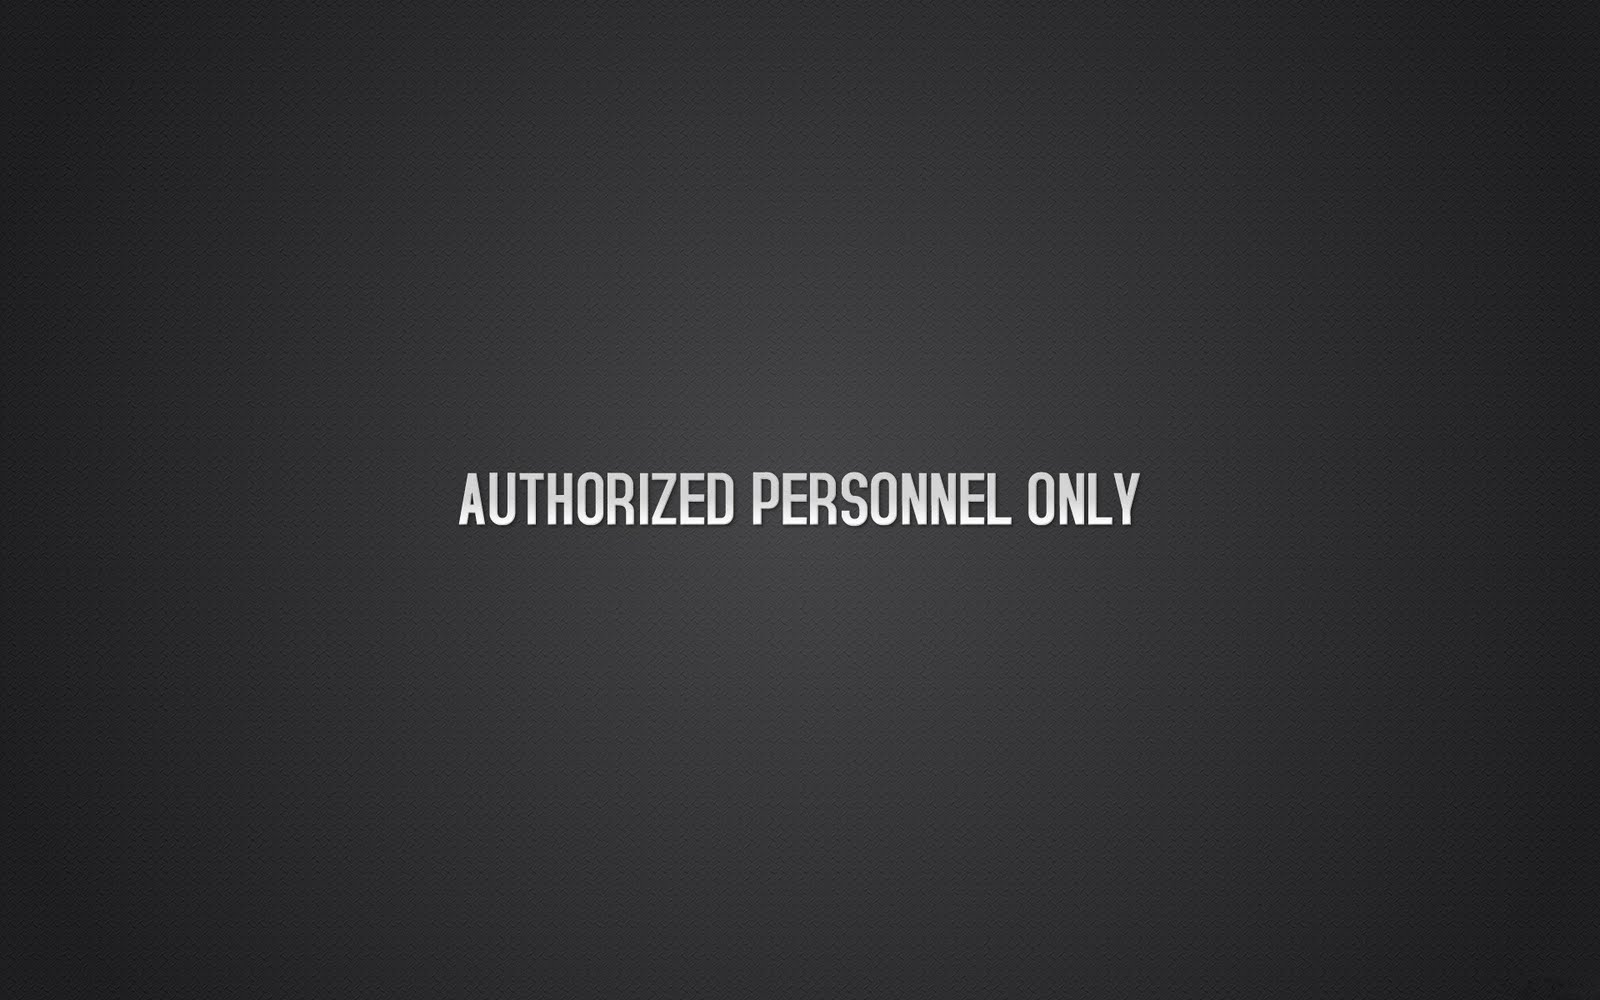 Authorized personnel only  simple black  wallpaper  hd The 